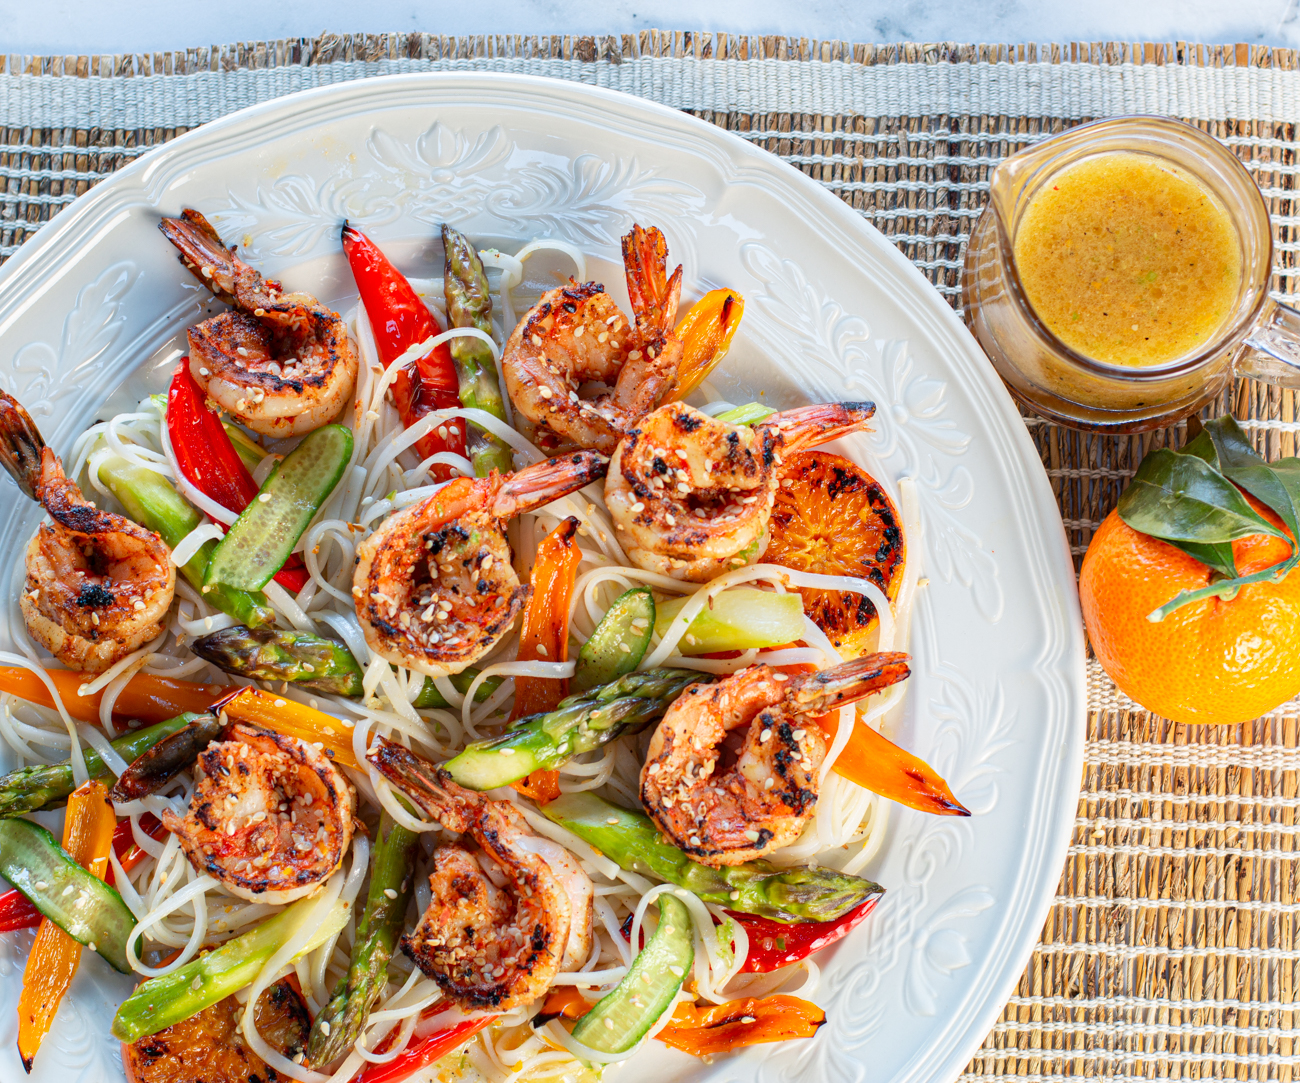 Spicy Citrus Chili Shrimp and What to Do With Them